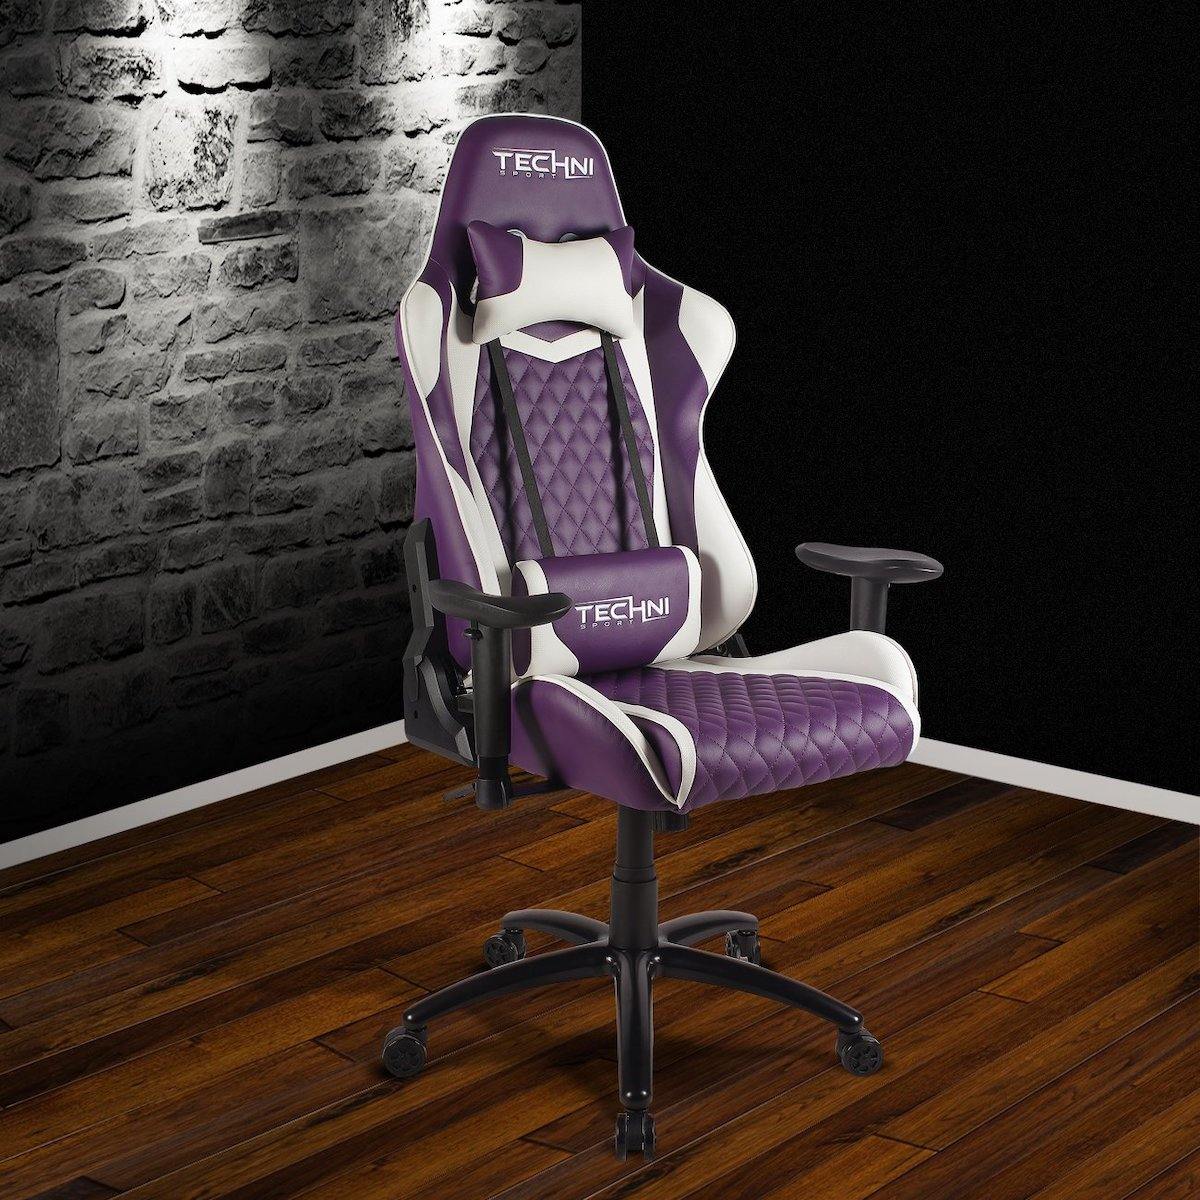 Techni Sport TS-52 Purple Ergonomic High Back Racer Style PC Gaming Chair RTA-TS52-PPL in Office